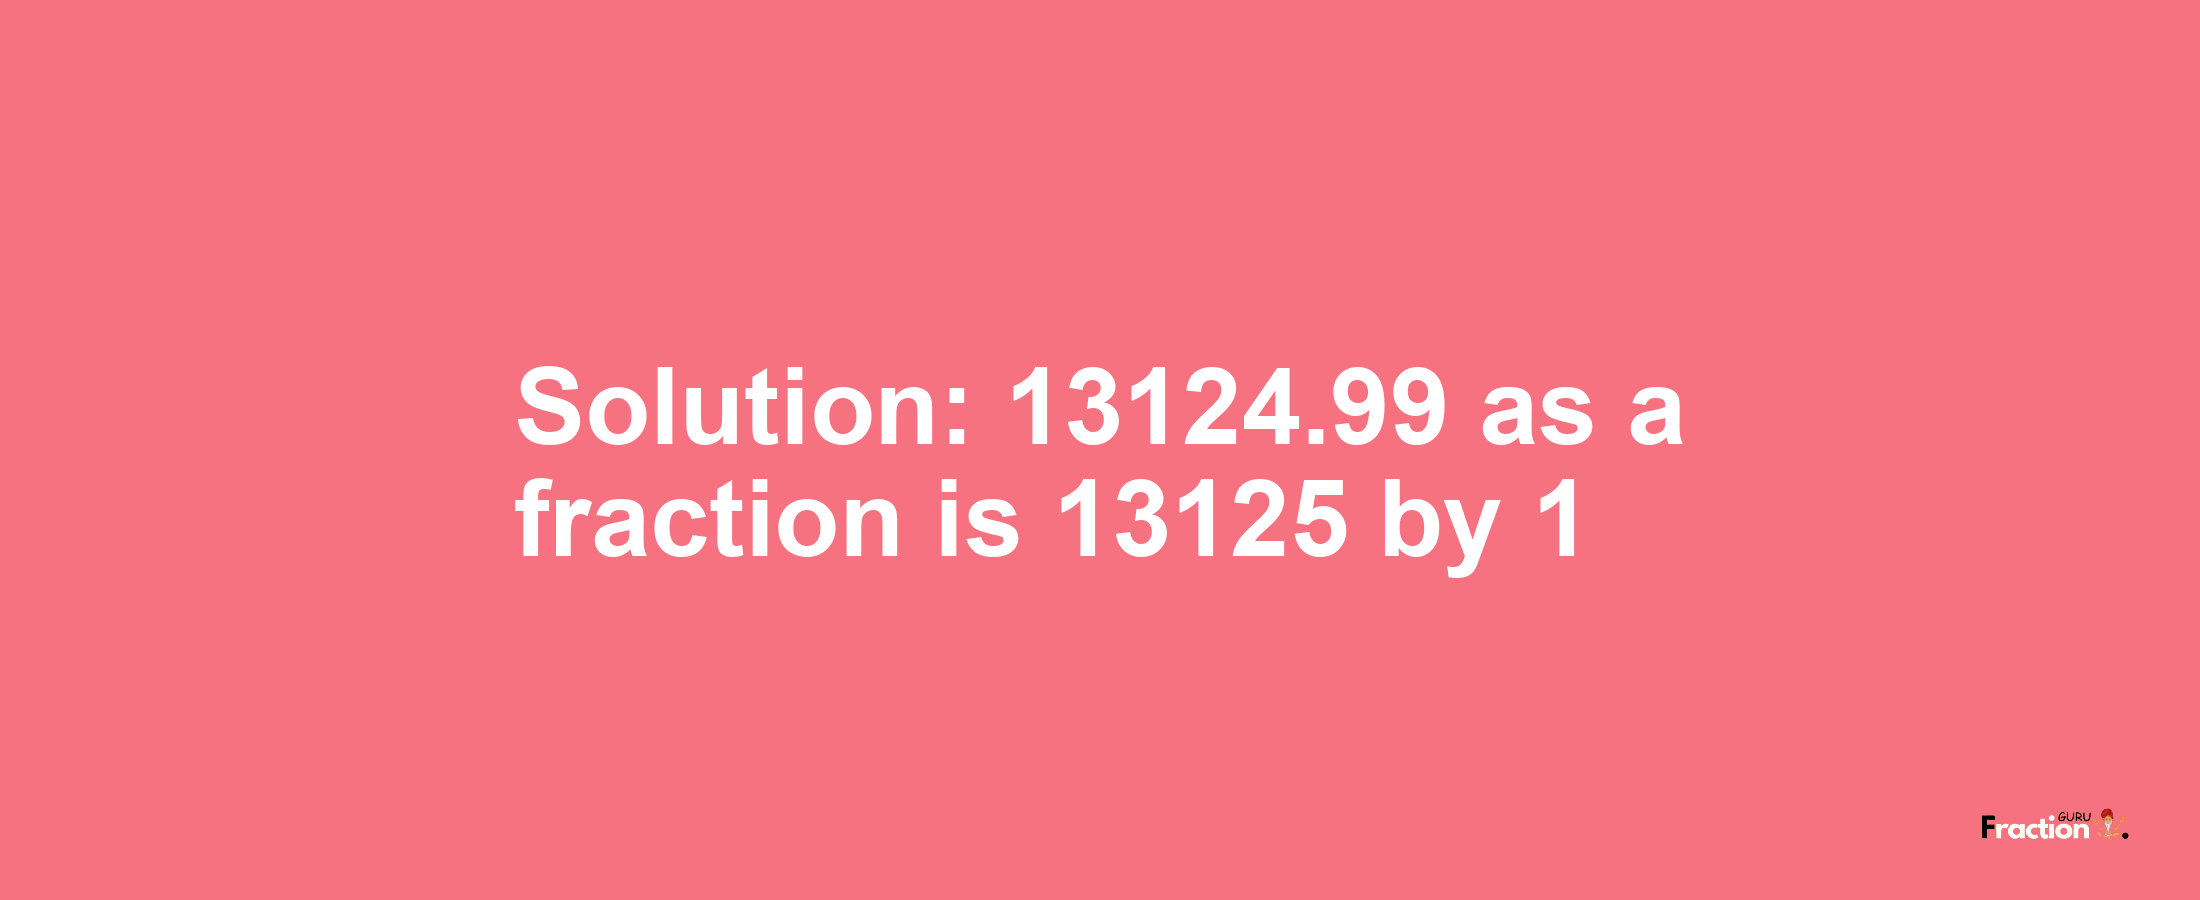 Solution:13124.99 as a fraction is 13125/1